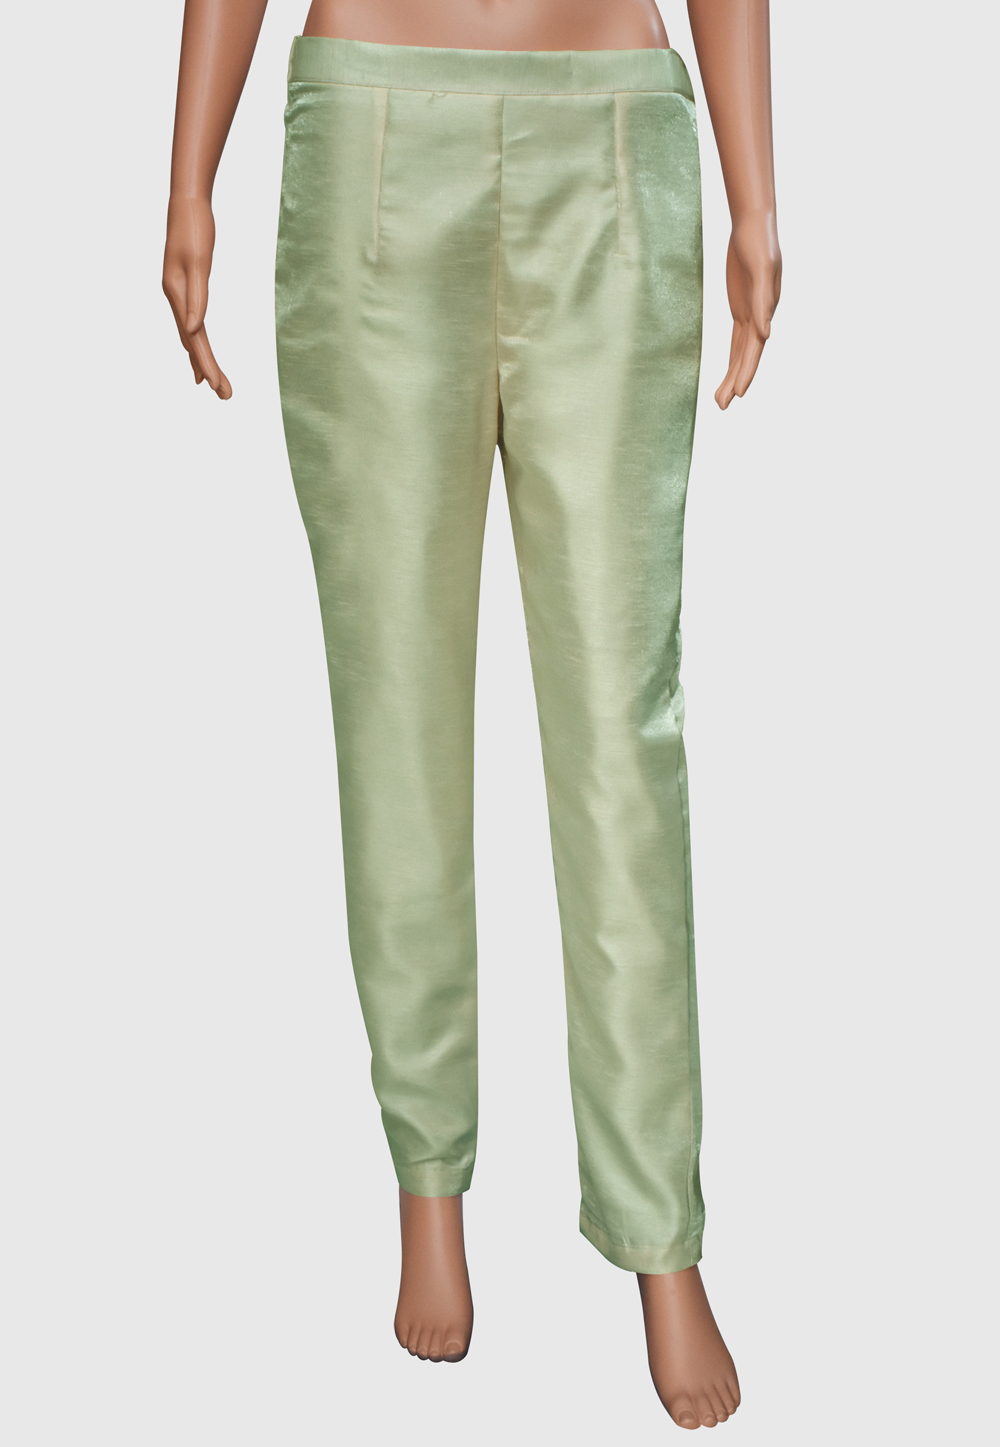 Pista Green Colour Straight Pant  The Pajama Factory